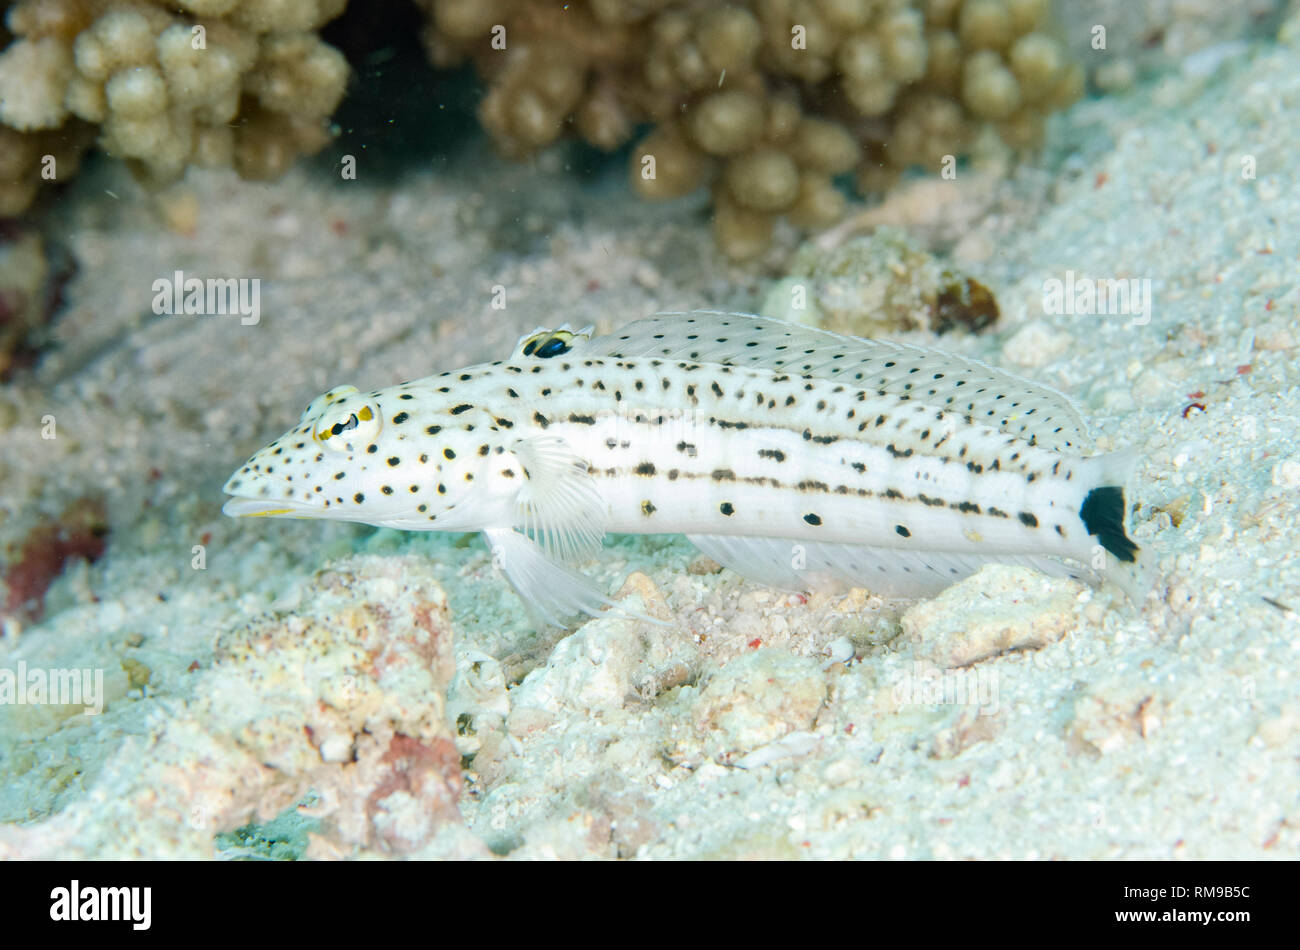 Speckled Sandperch, Parapercis hexophthalma, Tanjung Bacatan dive site, off Kawula Island, near Alor, Indonesia, Indian Ocean Stock Photo